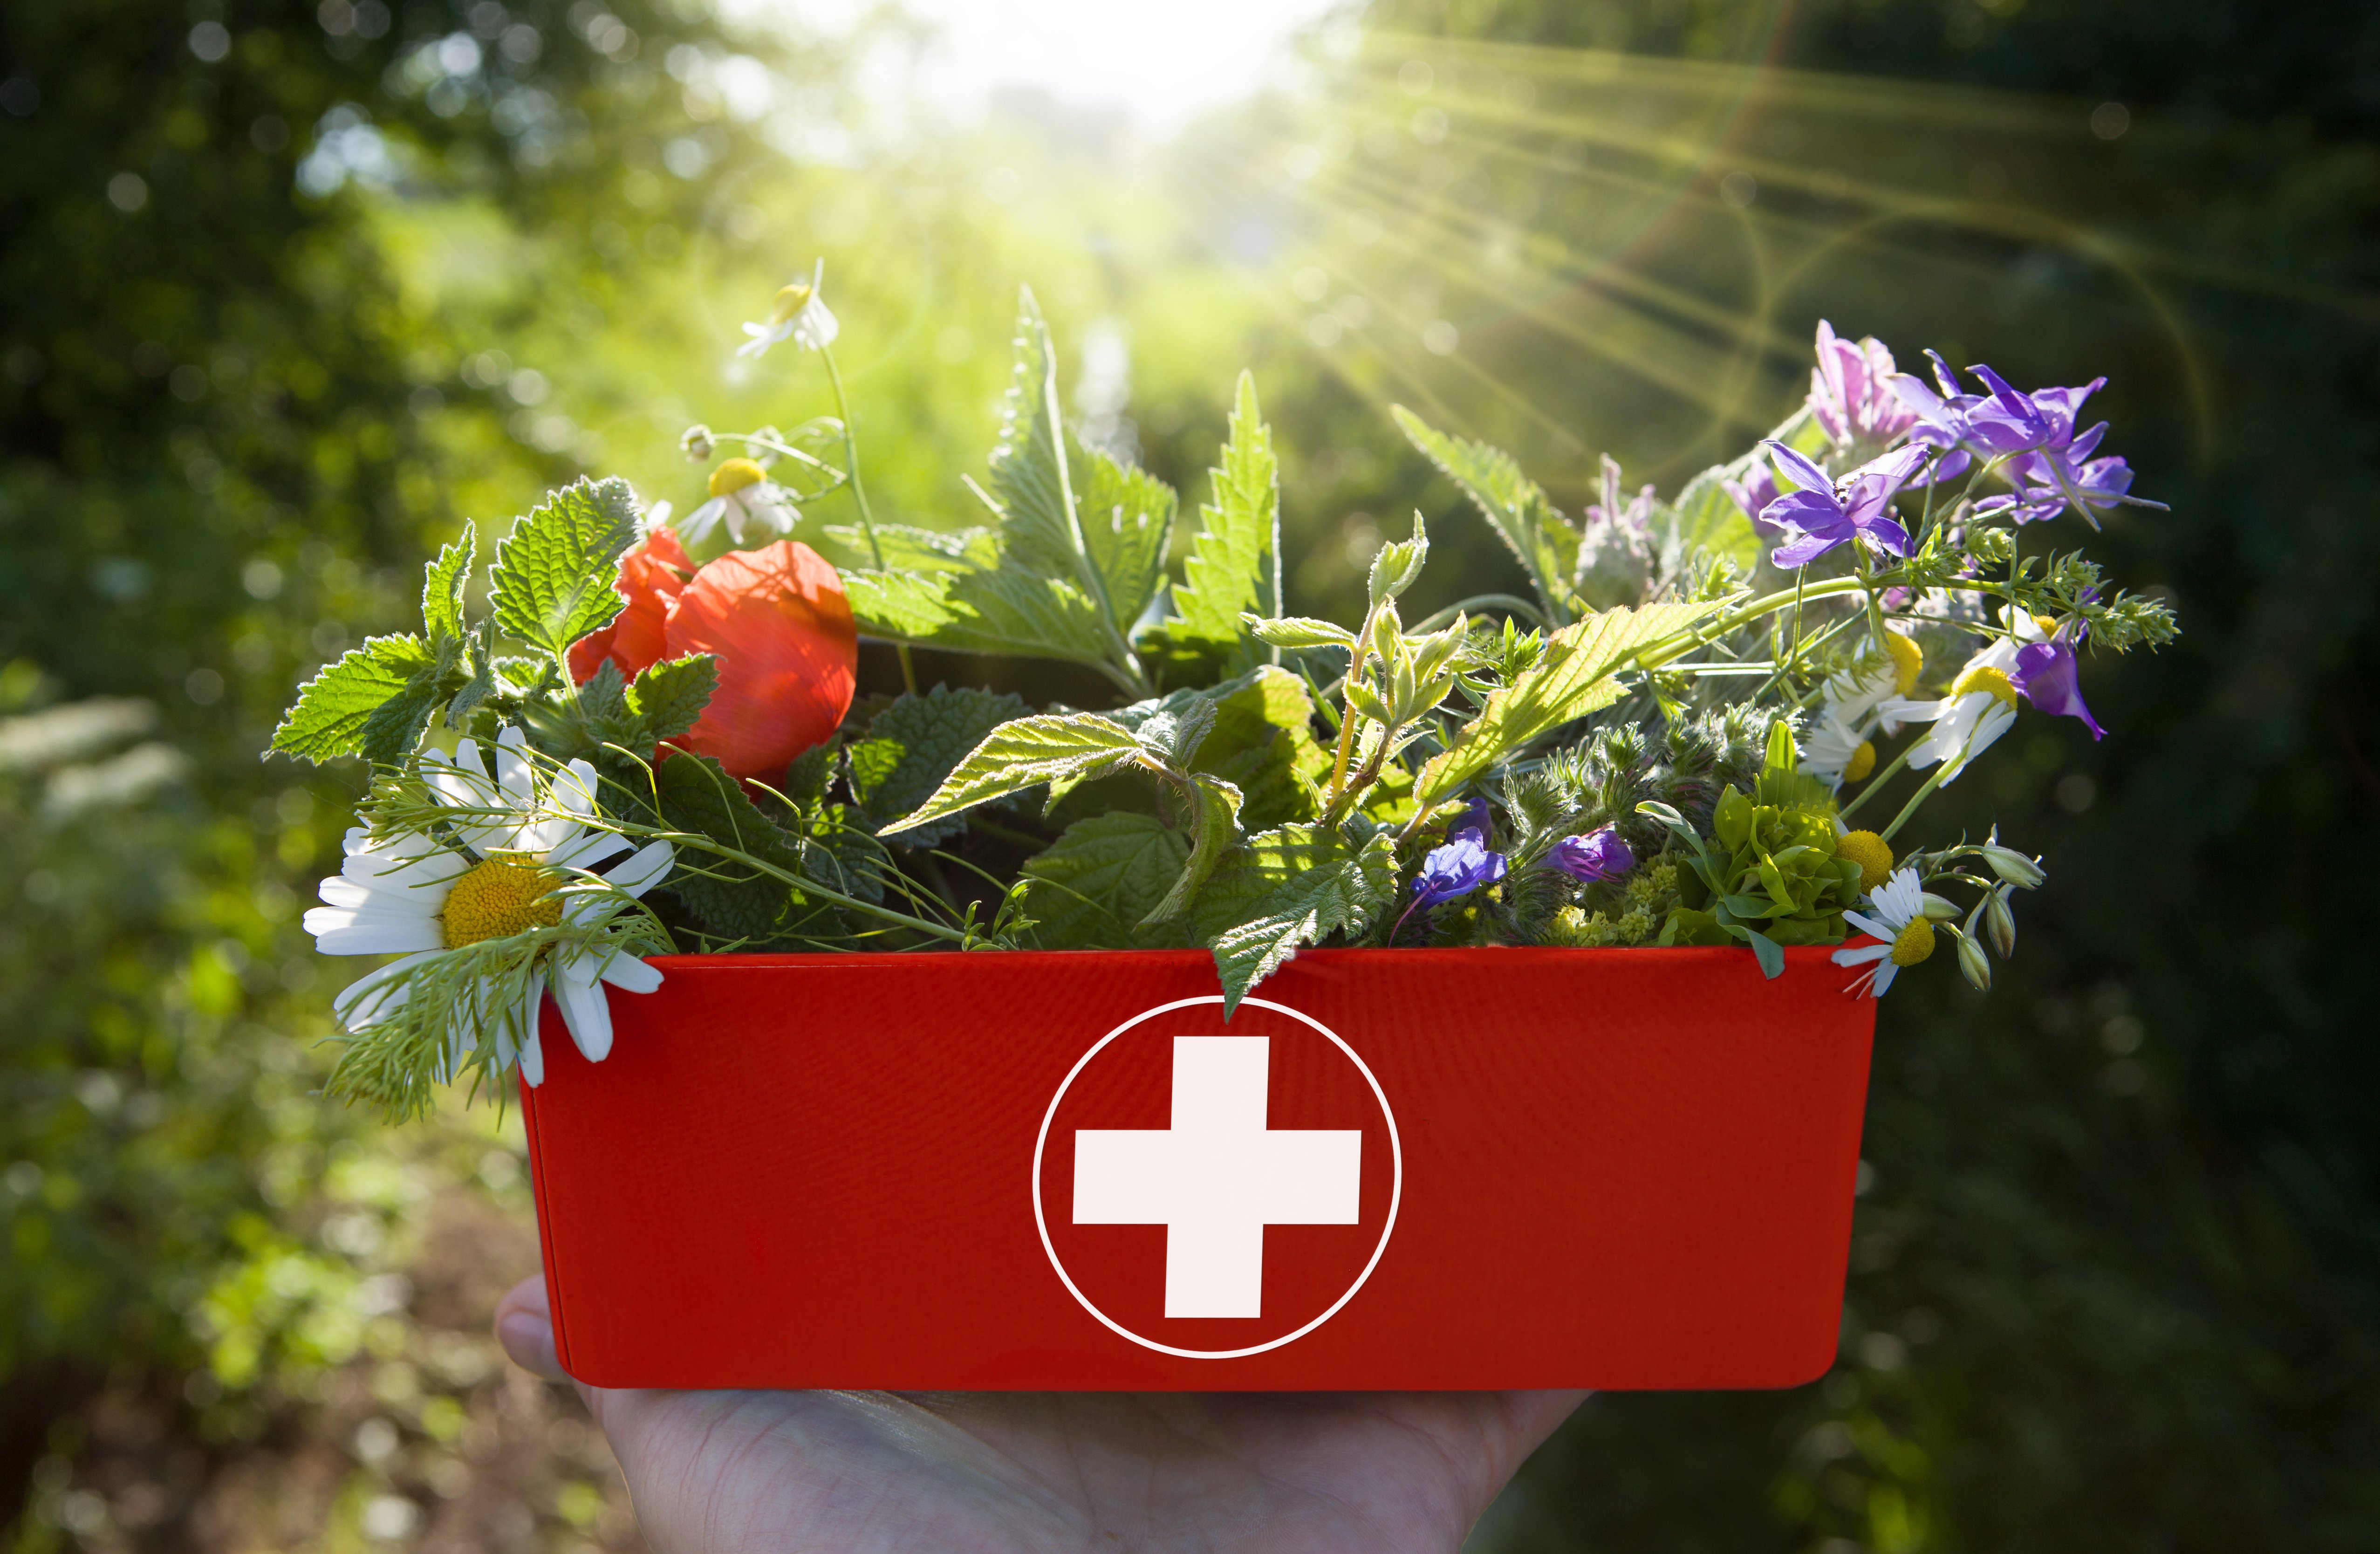 First aid kit filled with plants